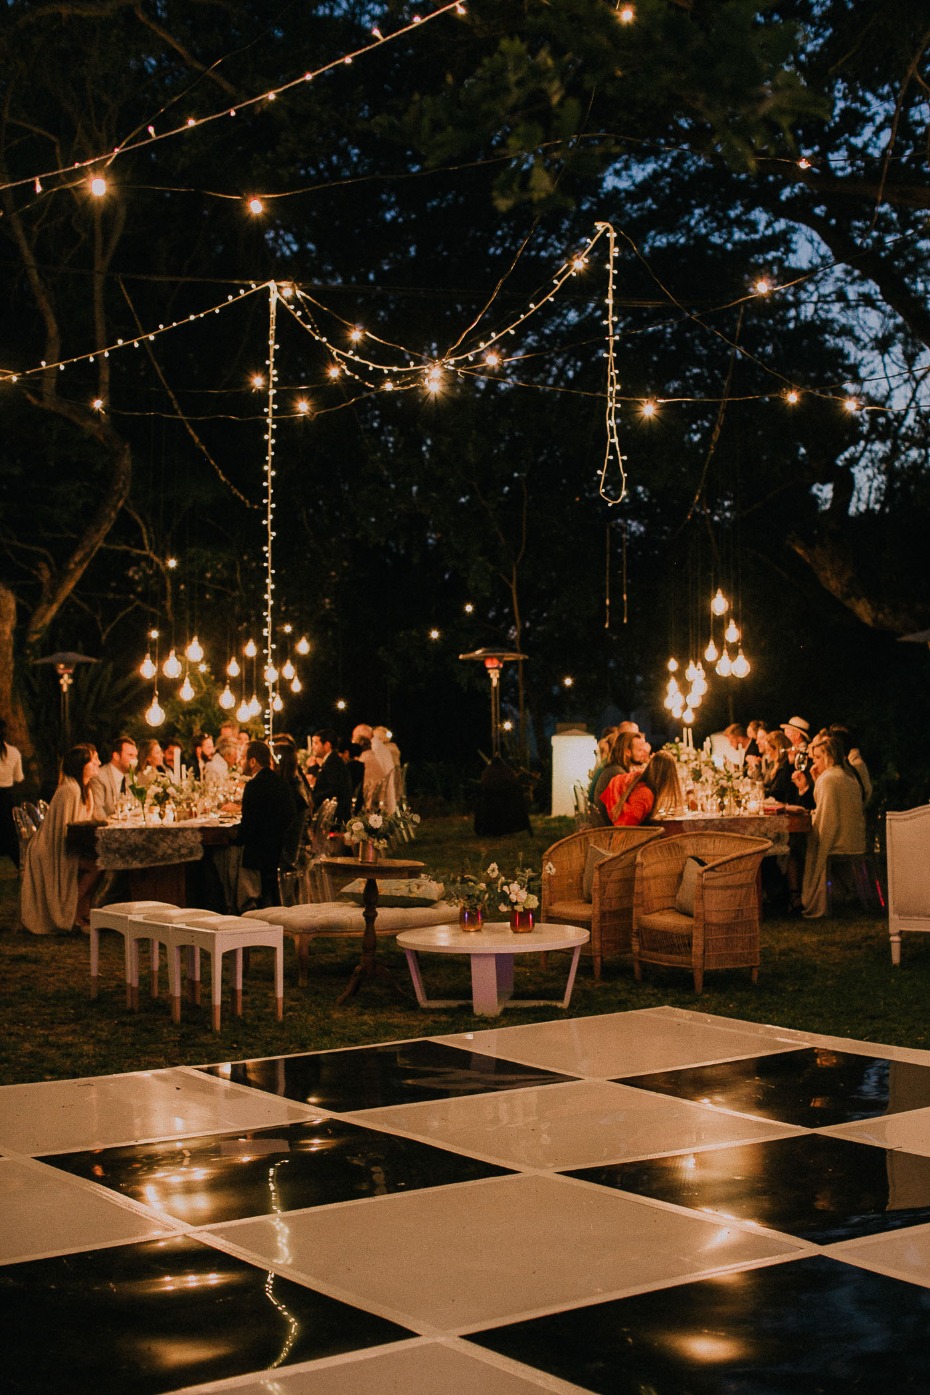 Checkered reception dance floor with hanging lights